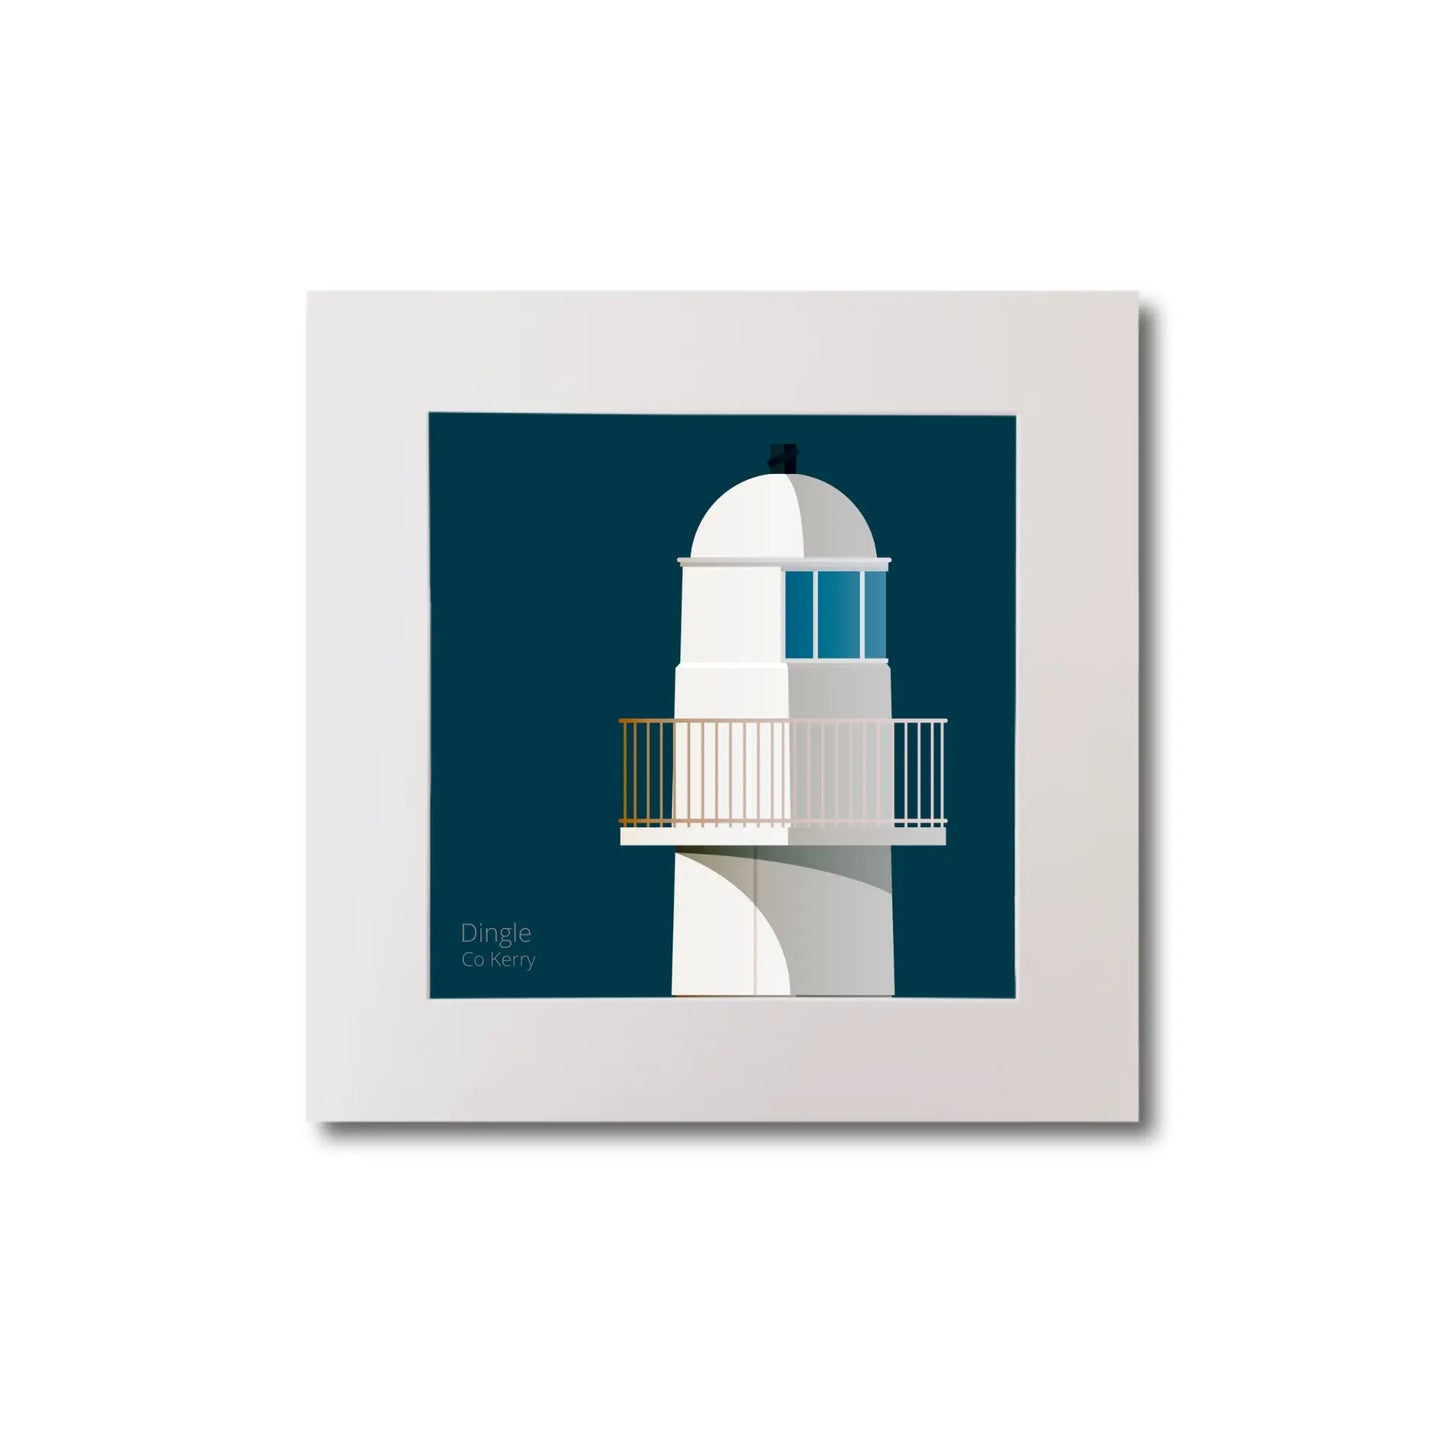 Illustration of Dingle lighthouse on a midnight blue background, mounted and measuring 20x20cm.